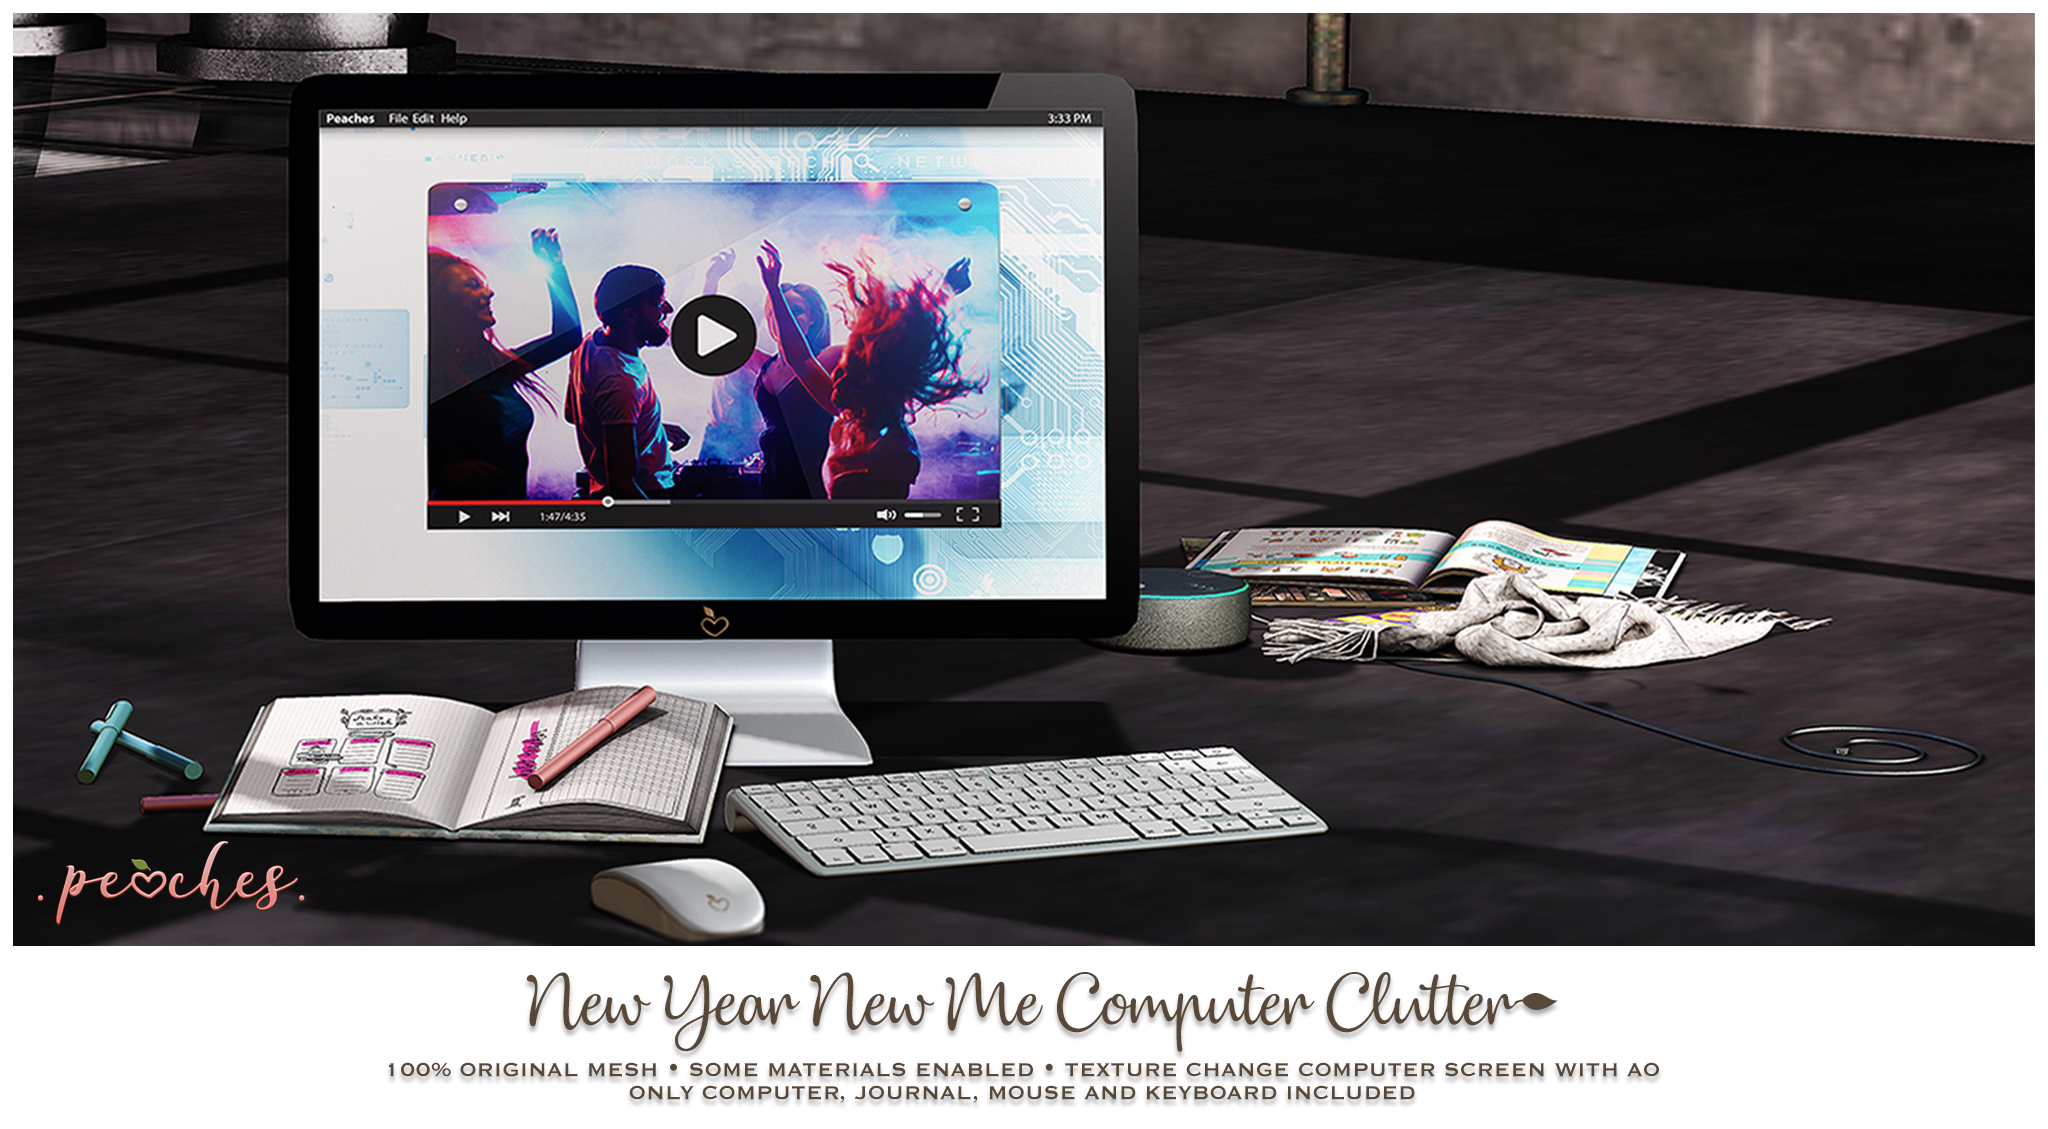 Peaches – New Year New Me Computer Clutter